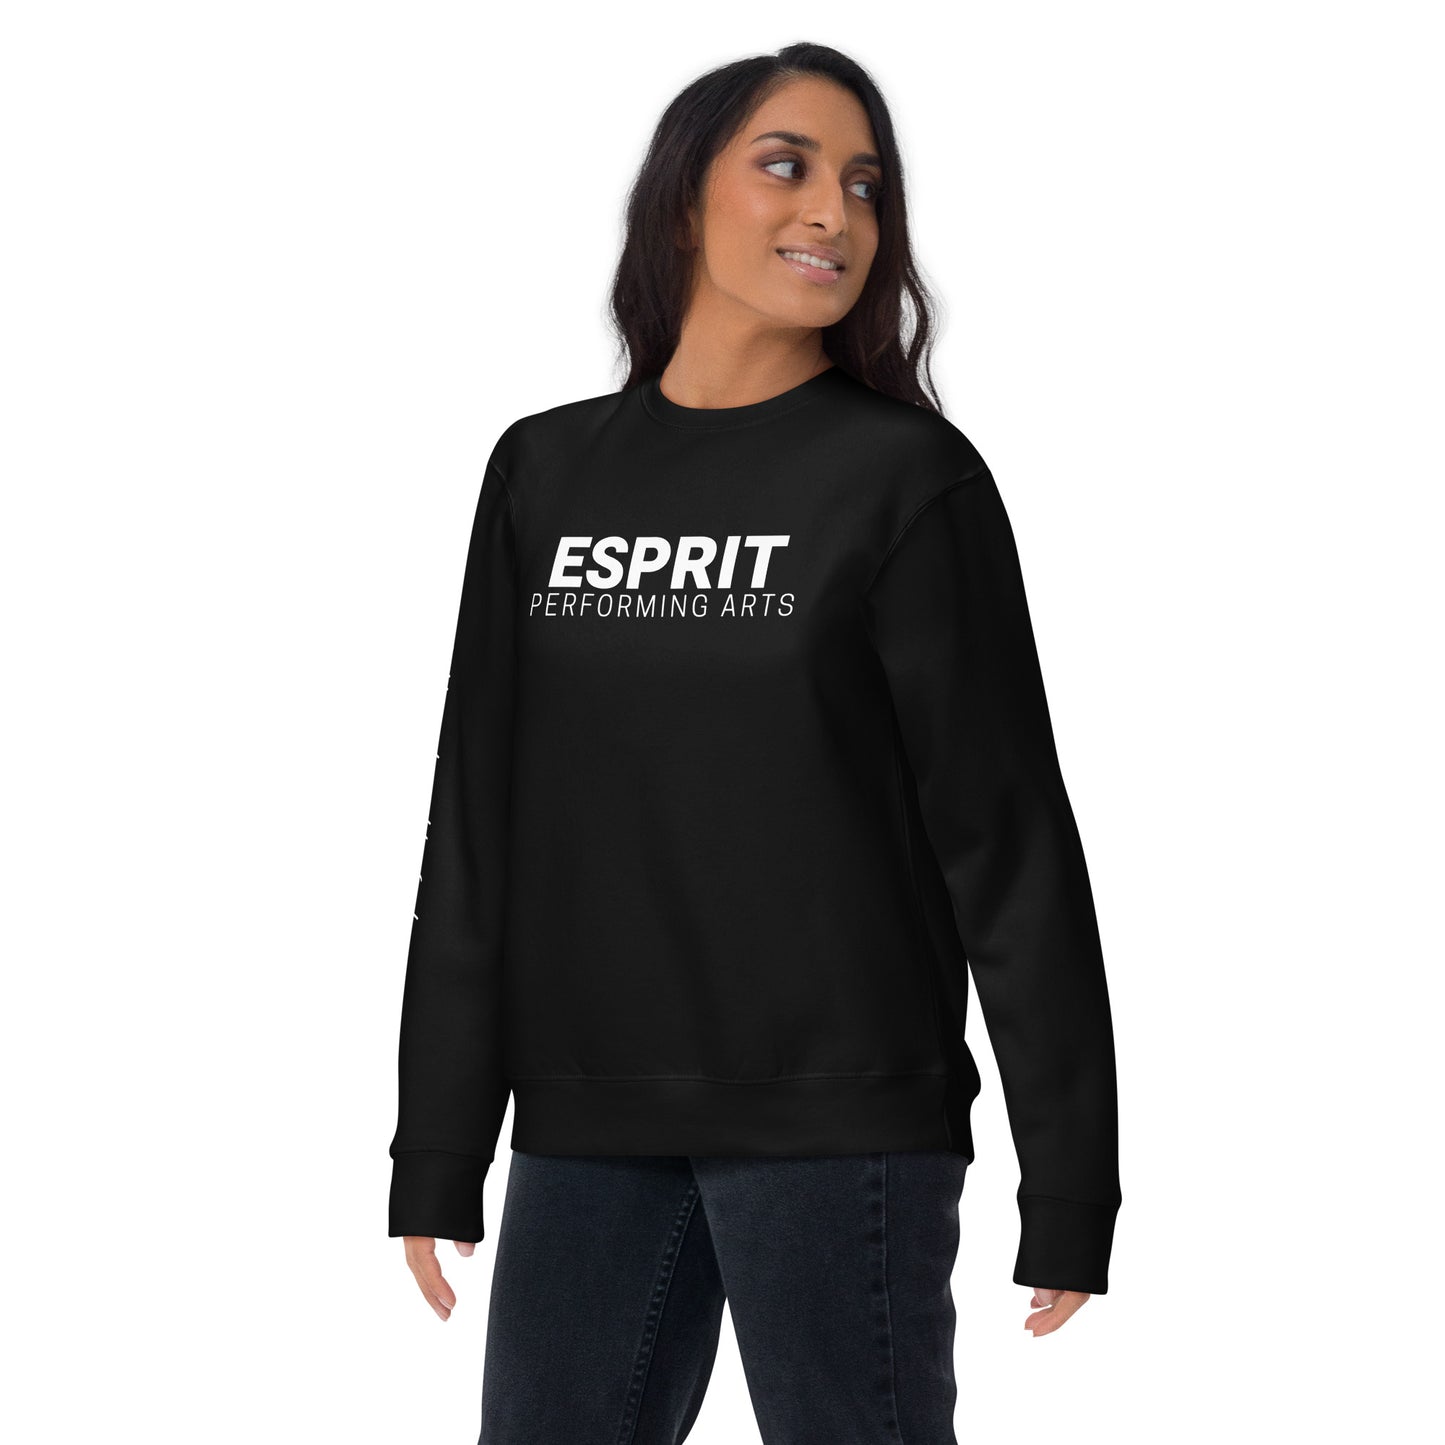 Esprit Performing Arts Adult Sweatshirt - "full out with feeling"